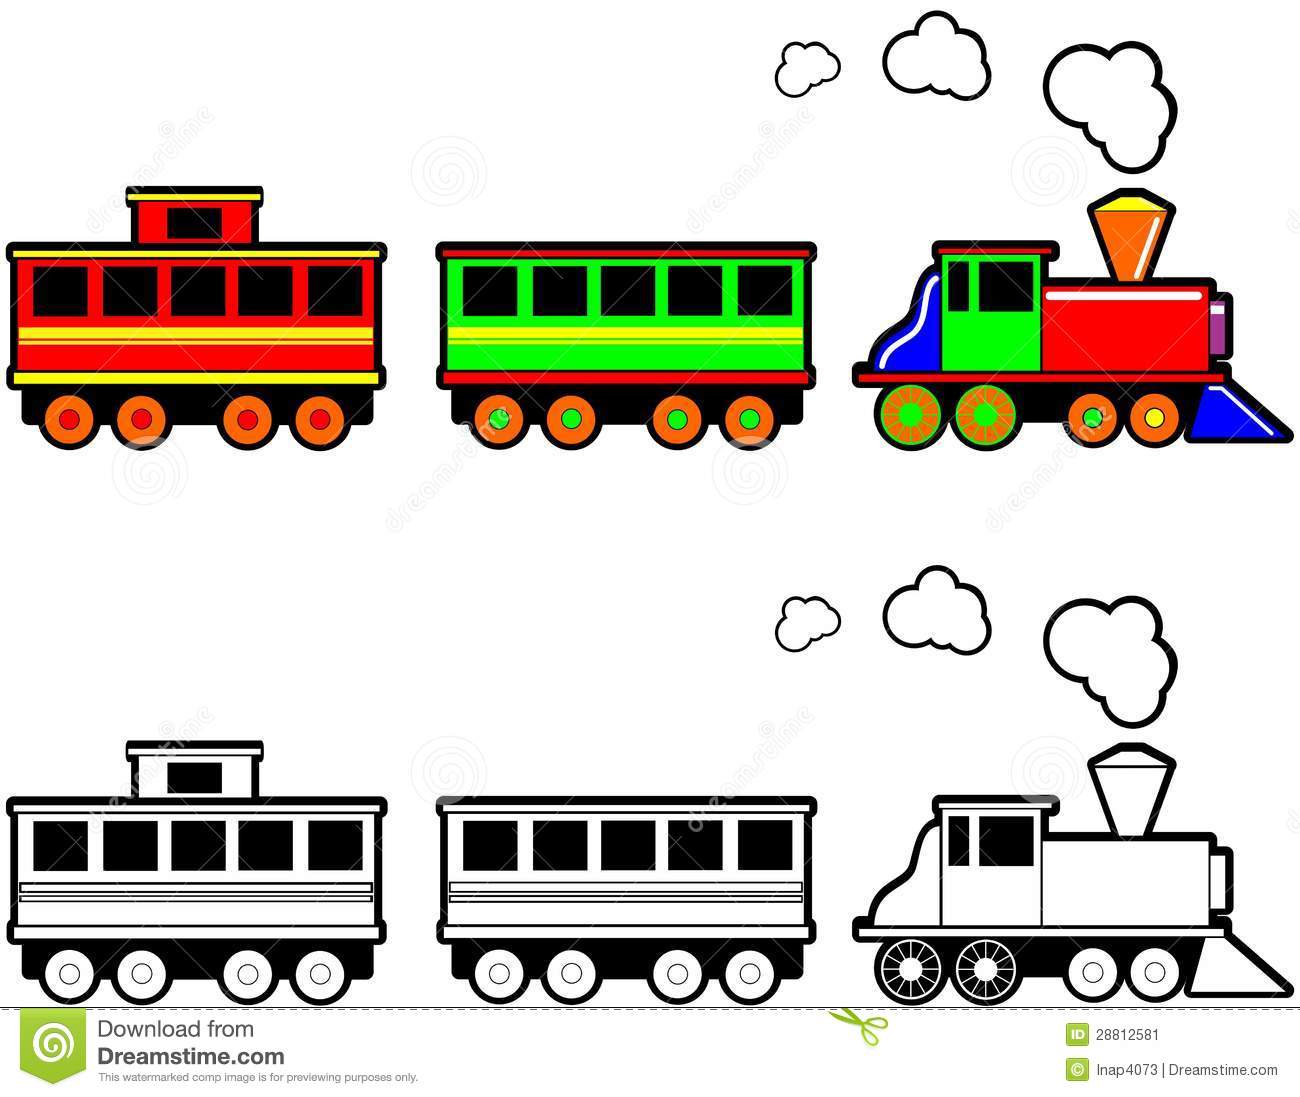 Toy Trains Clipart   Clipart Panda   Free Clipart Images